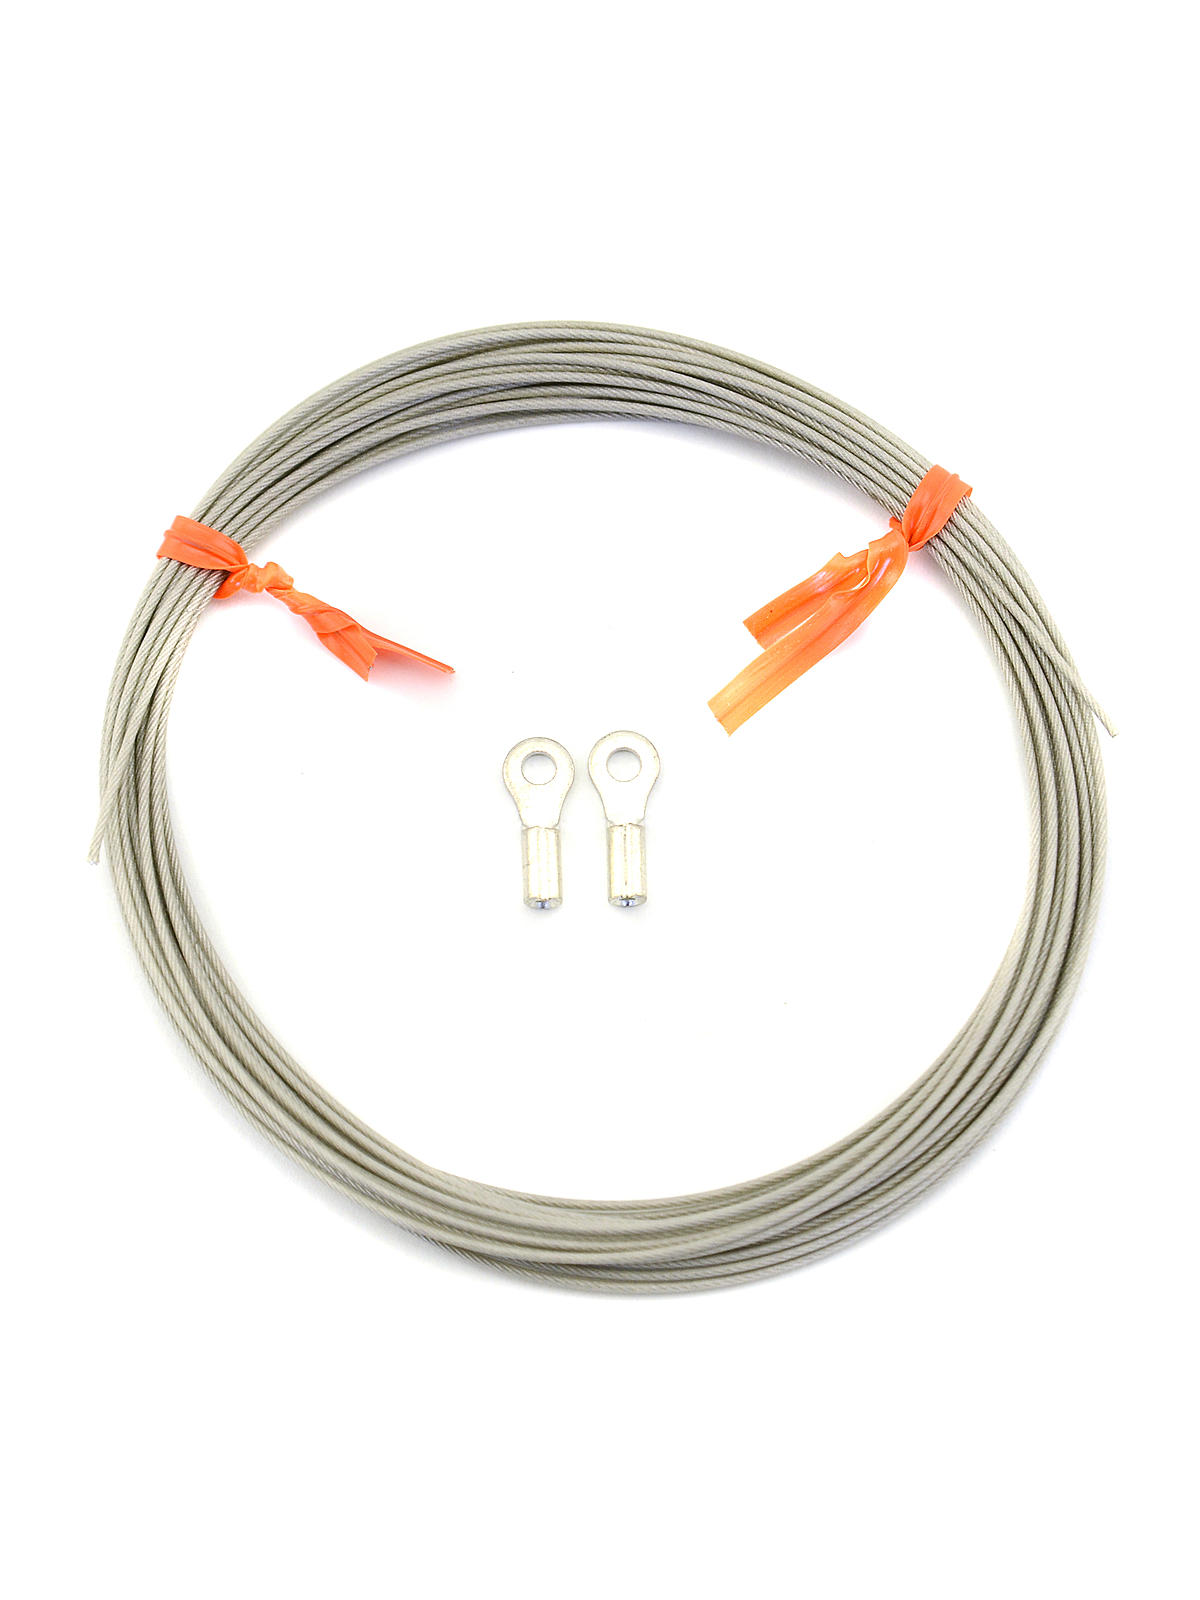 Replacement Cable For Straightedges For 30 In. - 42 In.